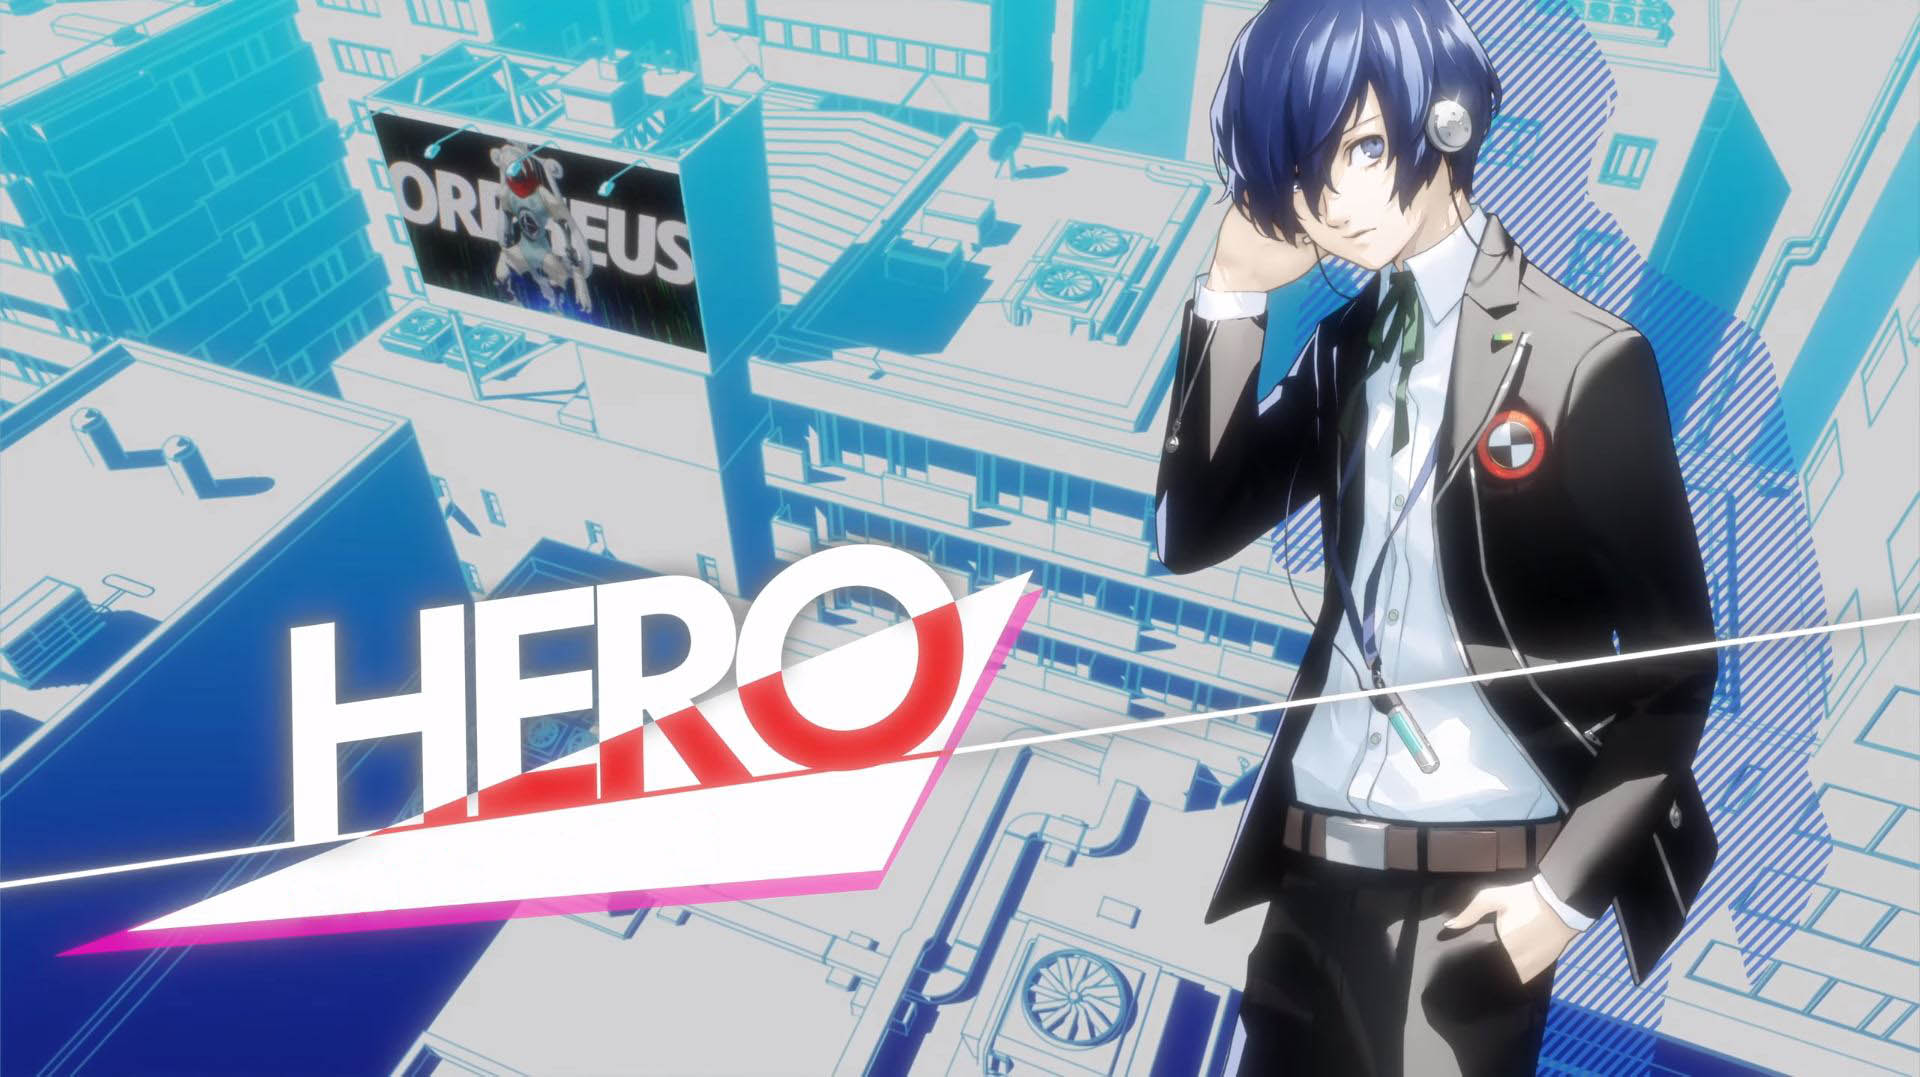 Persona 3 Reload gets new trailer reintroducing the protagonist